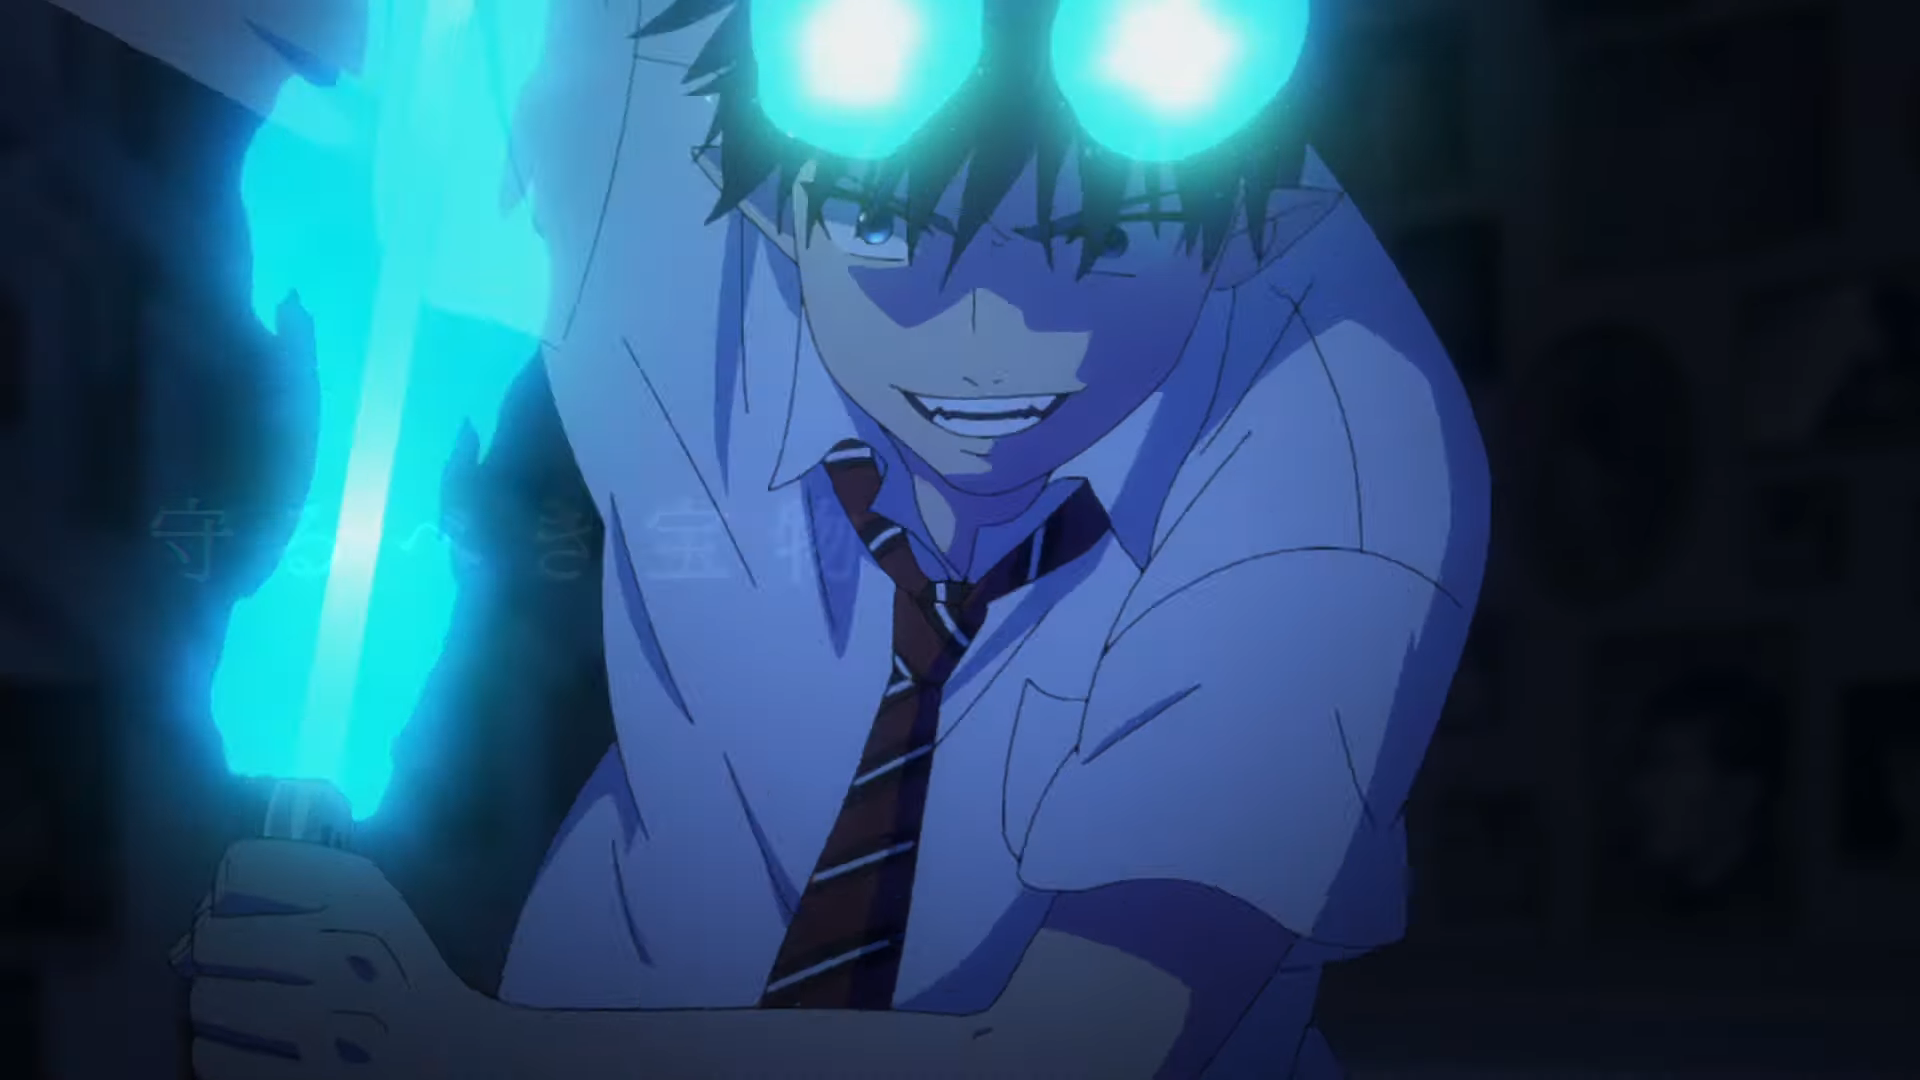 Here Are the Different Ways You Can Watch 'Blue Exorcist'